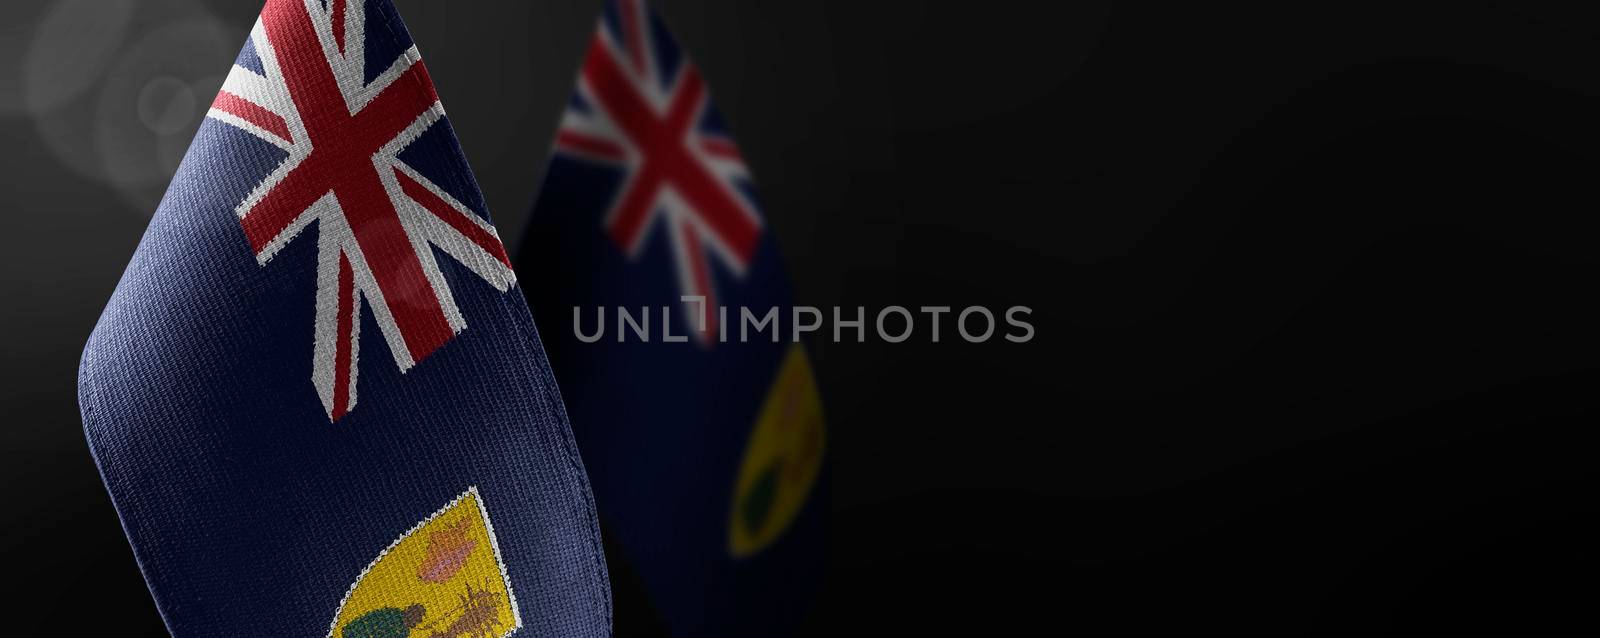 Small national flags of the Turks and Caicos Islands on a dark background.